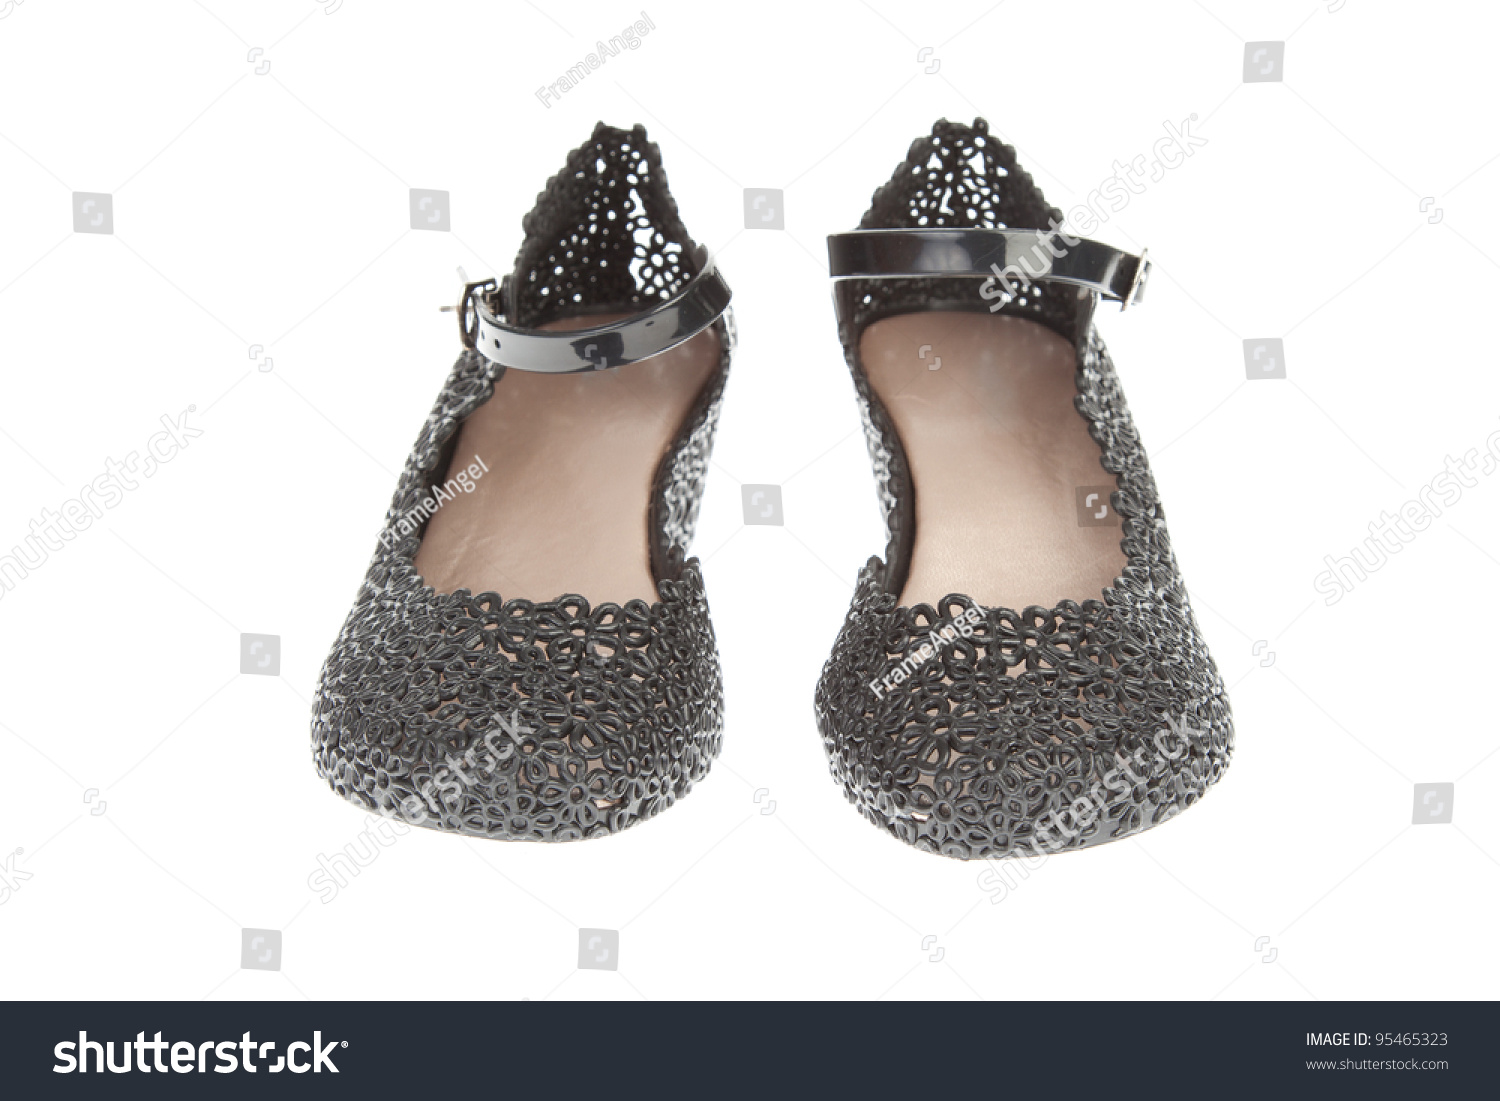 Pair Of Black Rubber Platform Shoes On White Background Stock Photo ...